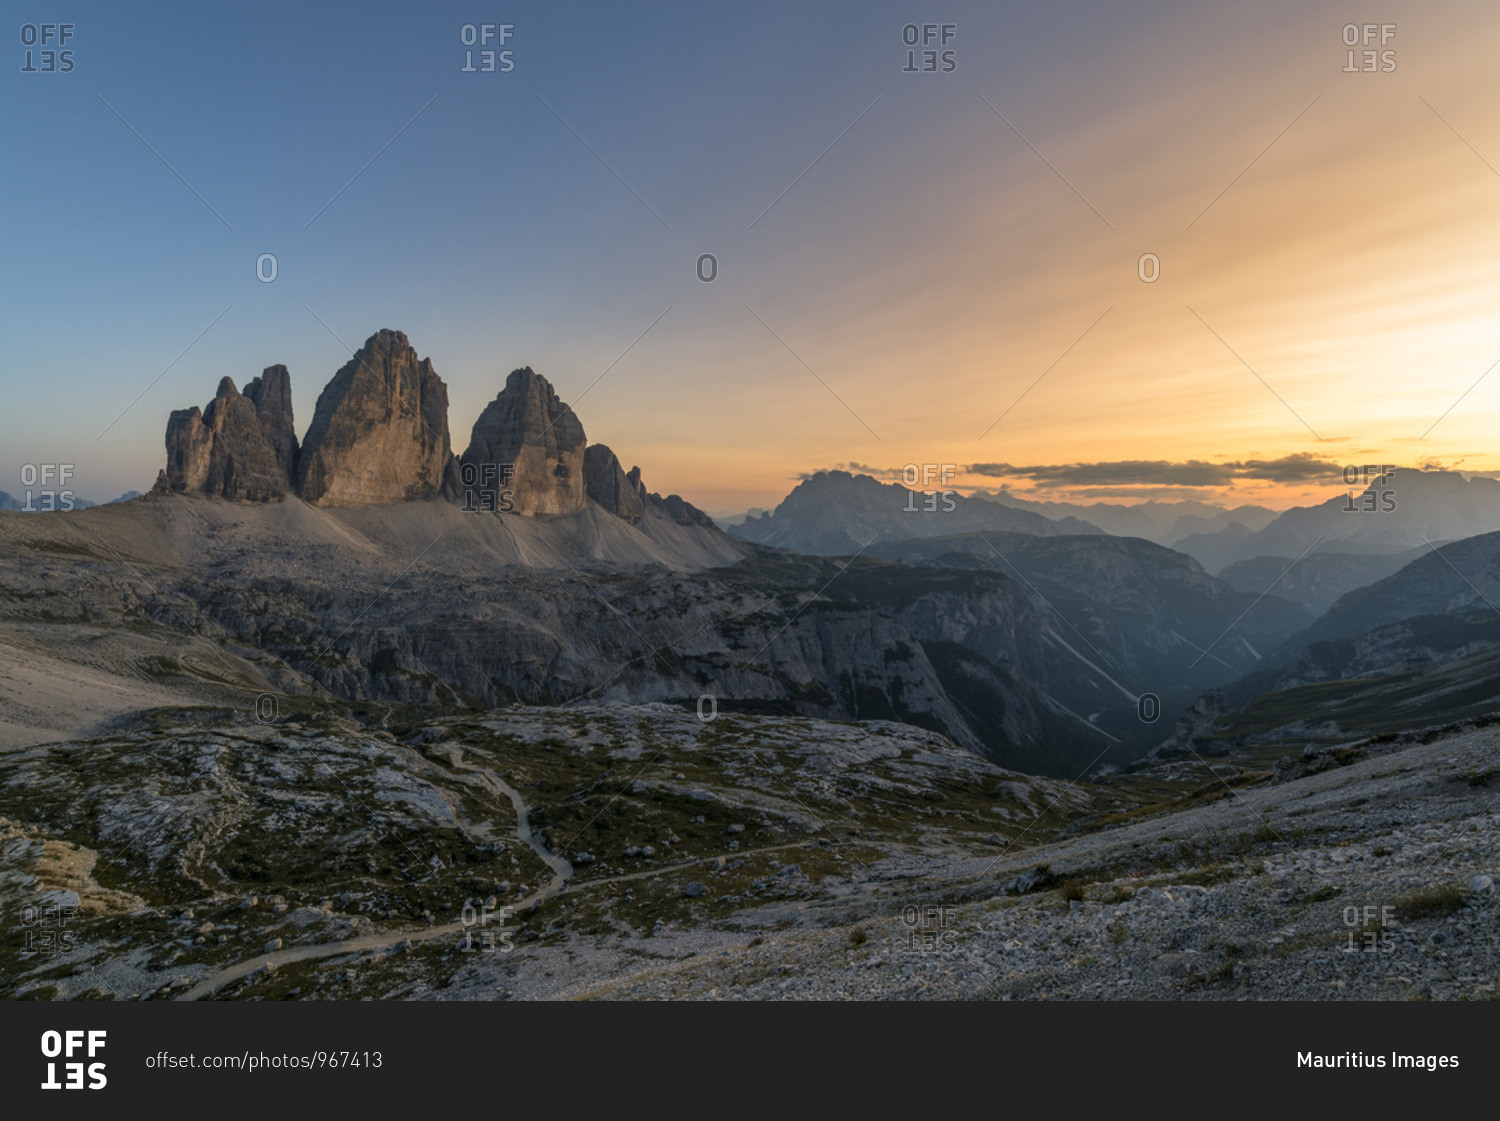 Three Peaks, View from the Tobling Knot, Sunset, Three Peaks Nature Park, Dolomites, South Tyrol, Italy